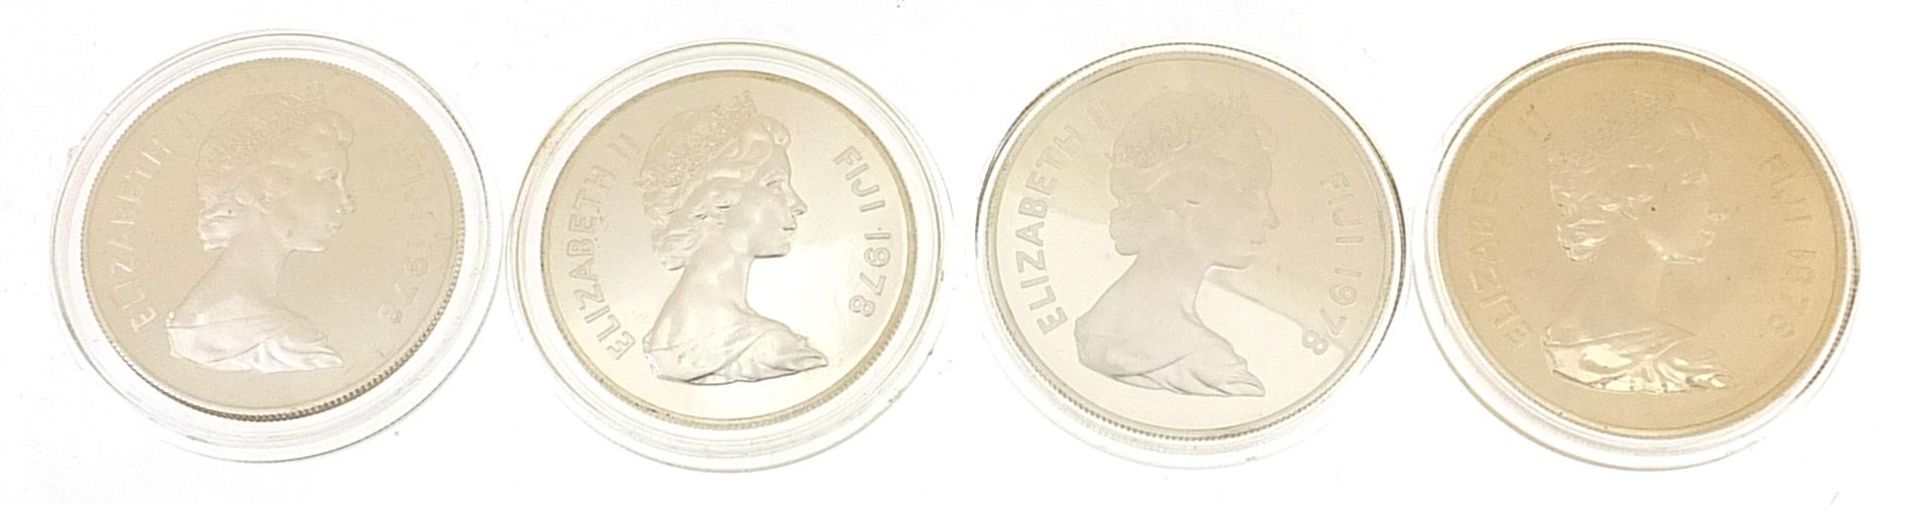 Four Elizabeth II silver proof coins with cases from the Conservation Coin Collection issued by - Image 3 of 4